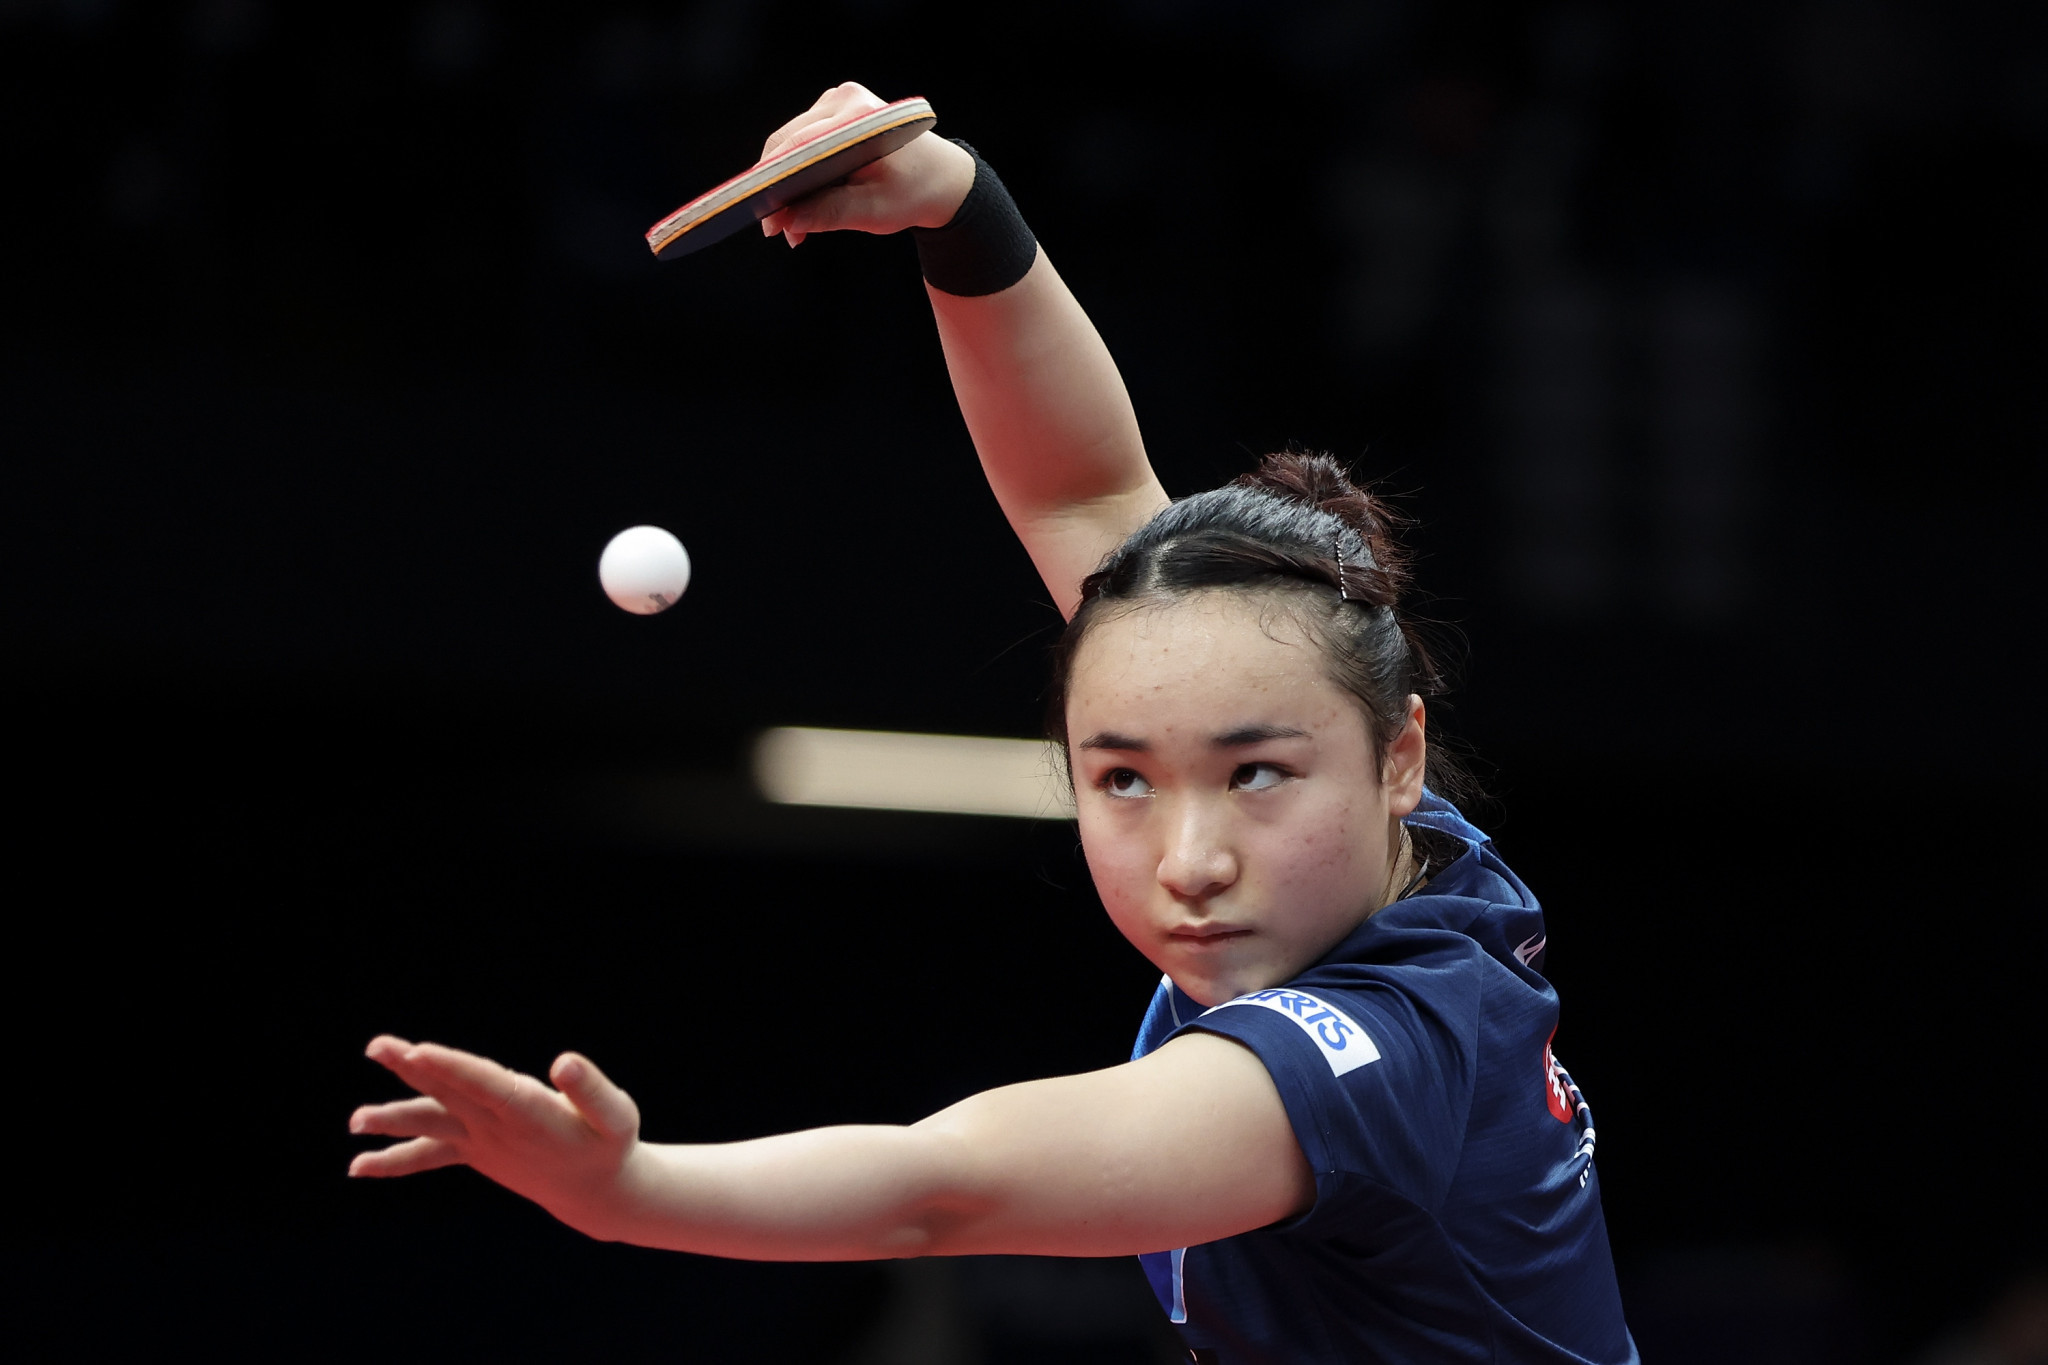 Ito holds nerve to reach fourth round at World Table Tennis Championships